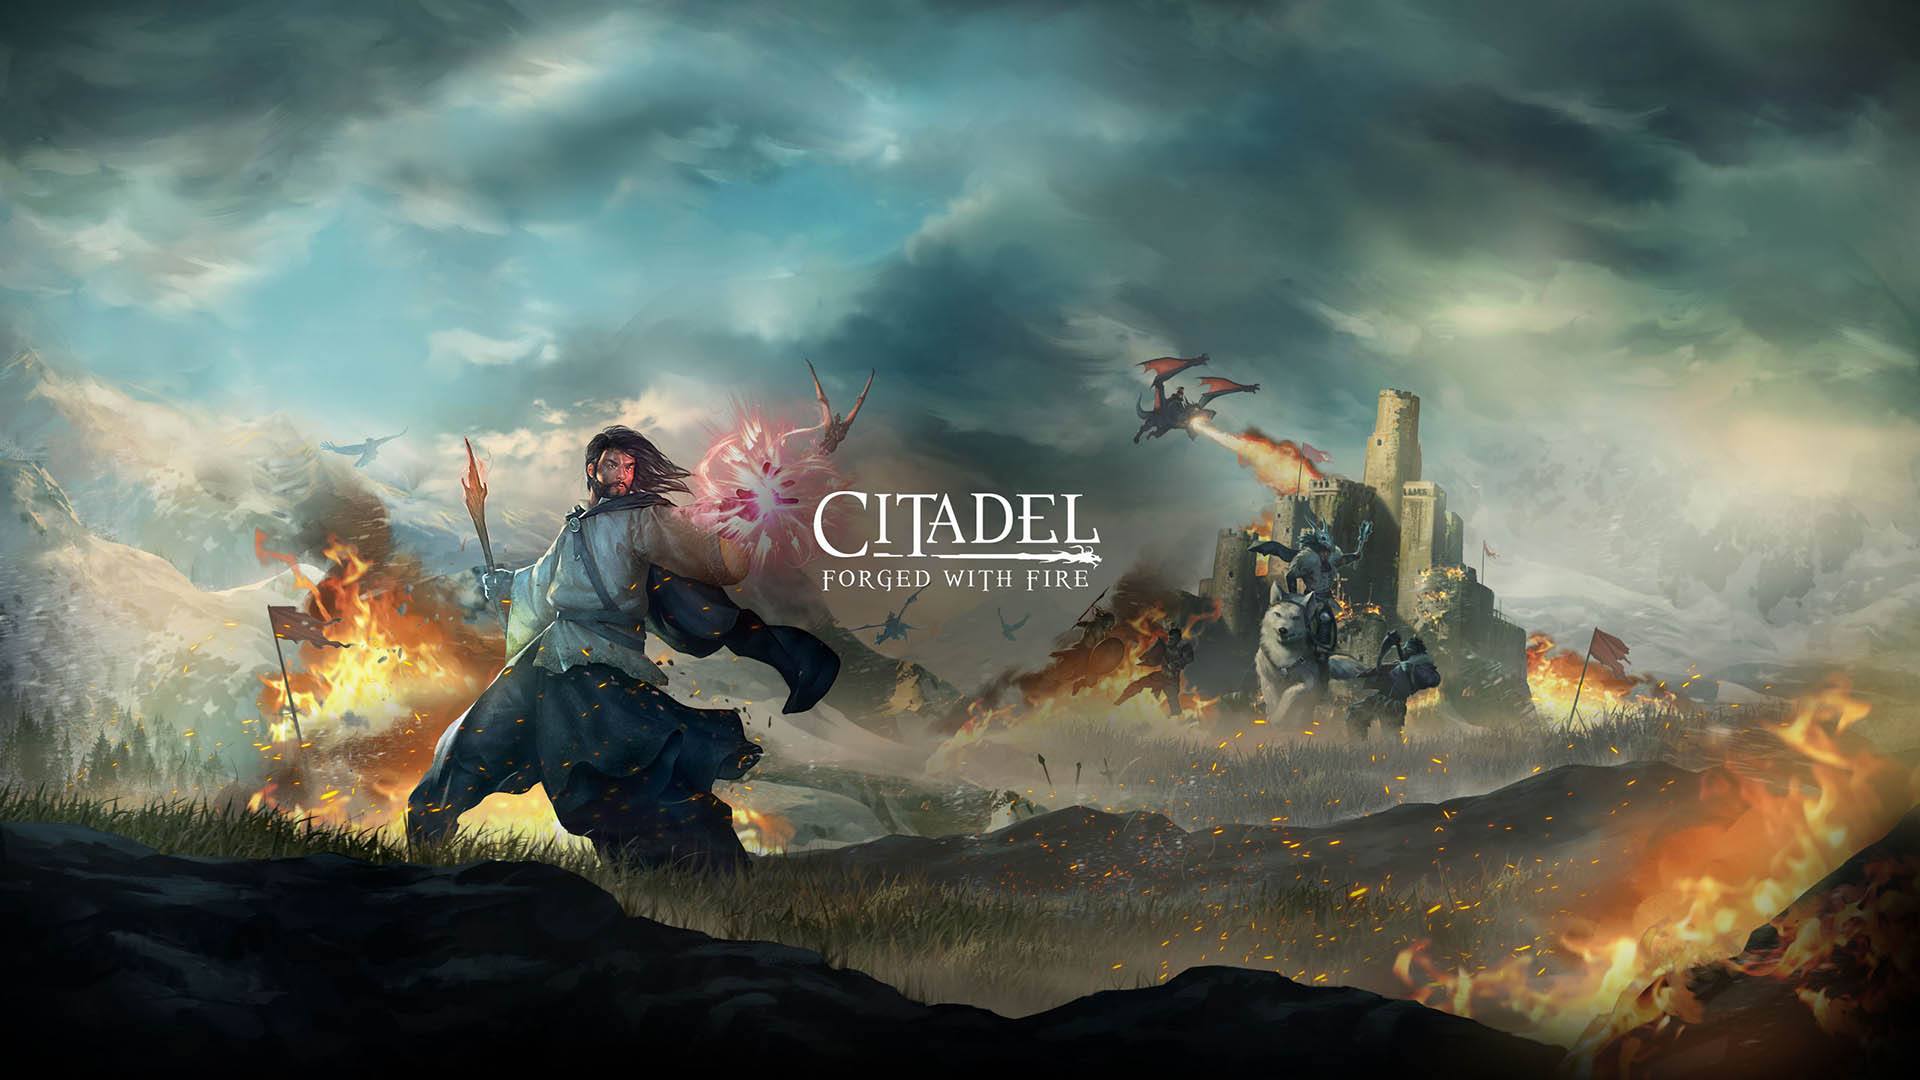 [PC] Citadel: Forged with Fire (Early Access|RPG|Massively|Multiplayer|Action|2017)